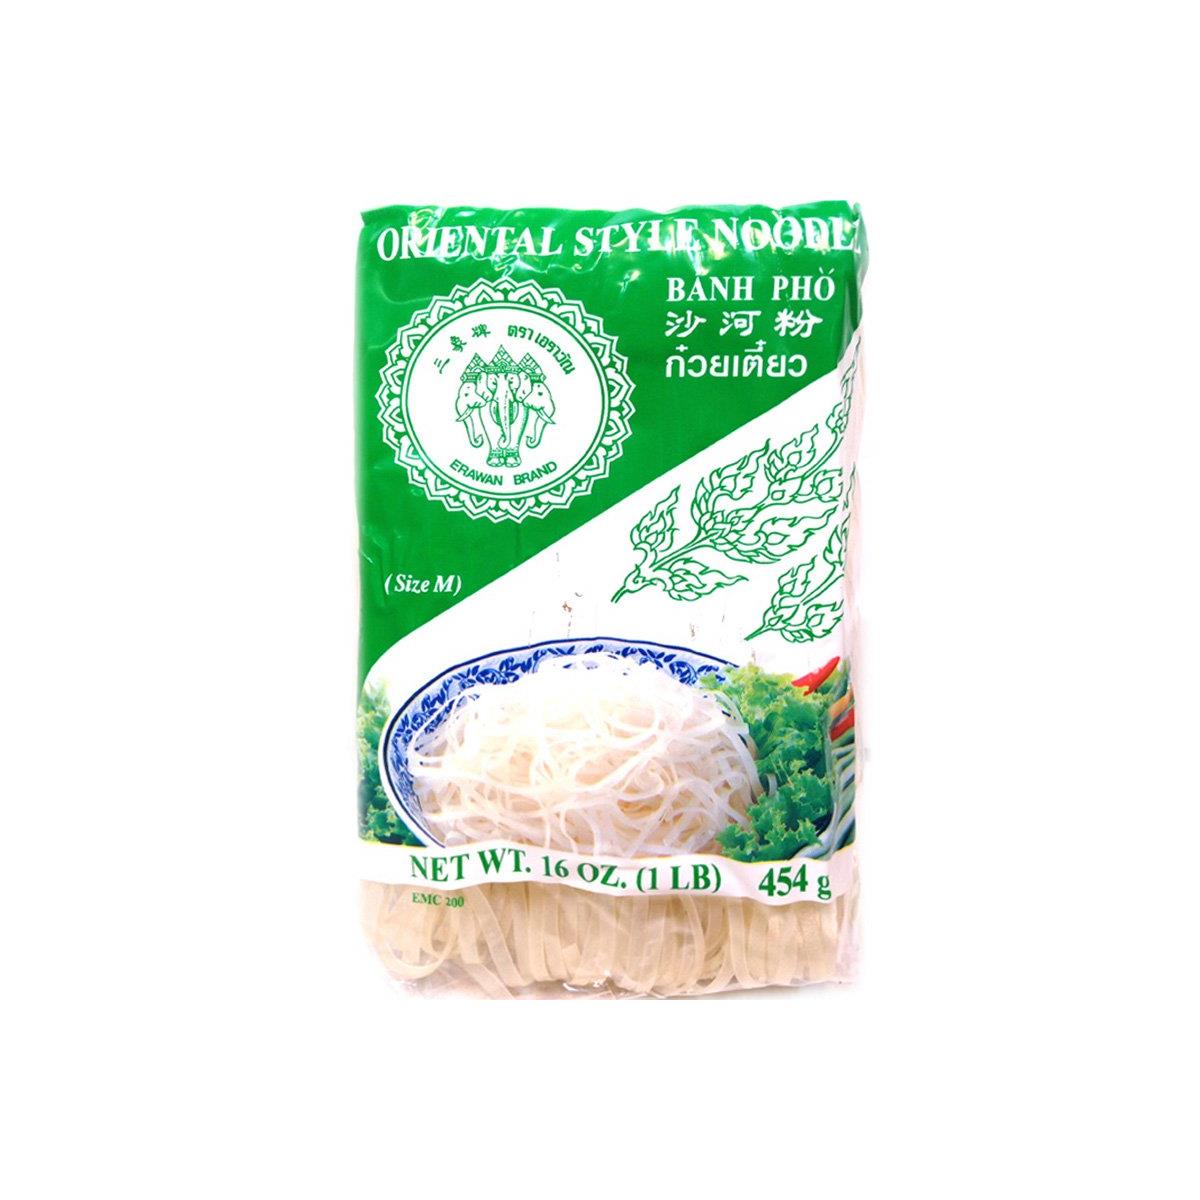 Oriental Style Noodle (Size M / Banh Pho) - 16oz (Pack of 1)